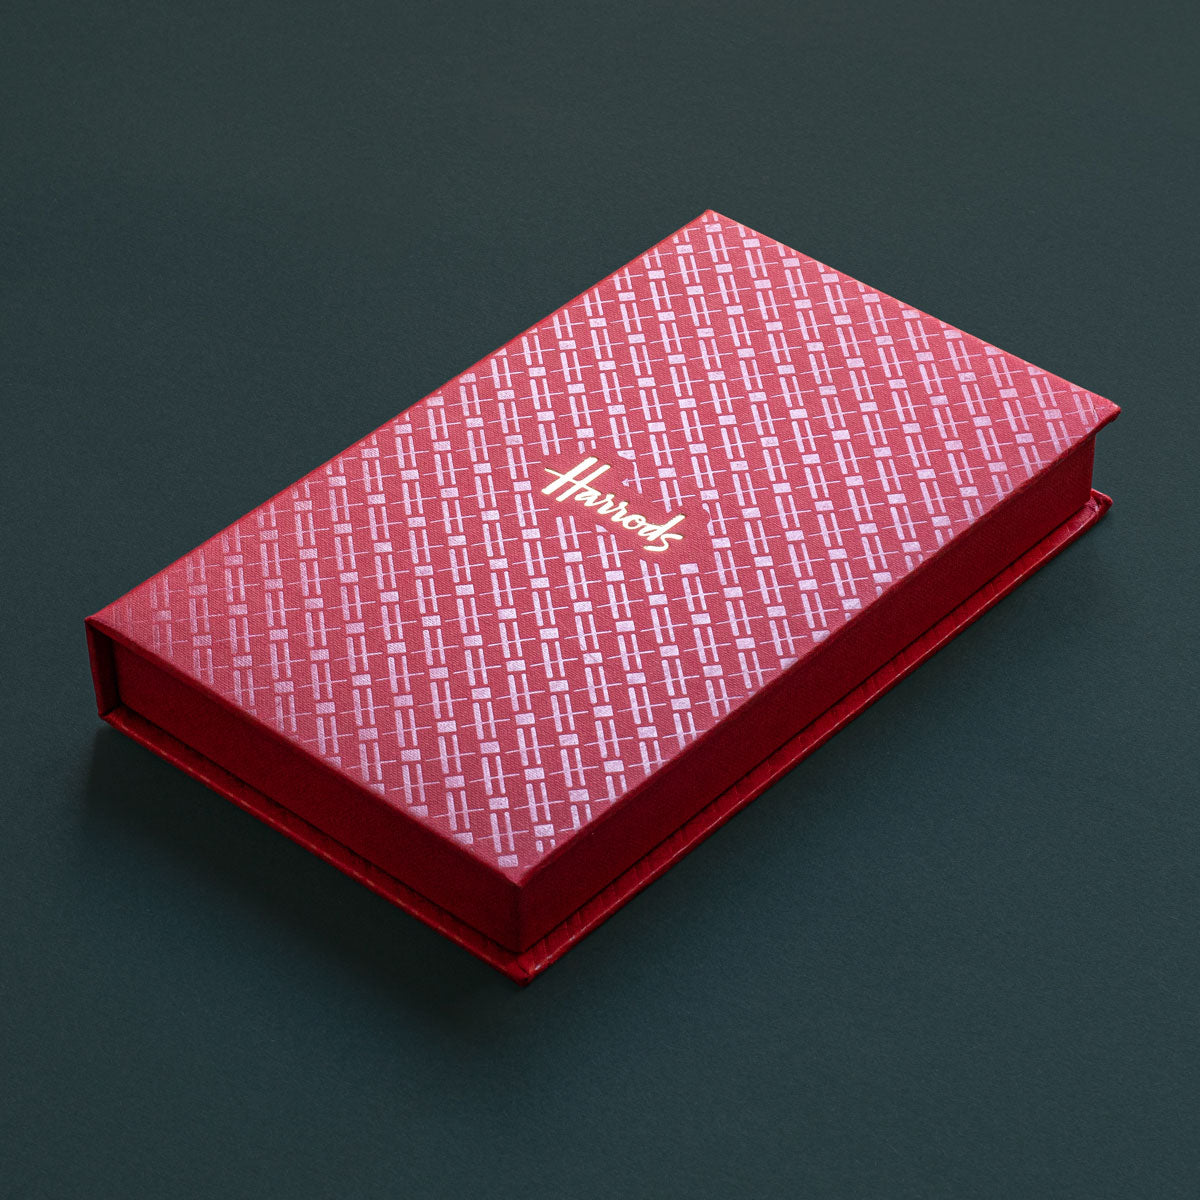 bespoke red and gold box crafted for harrods london